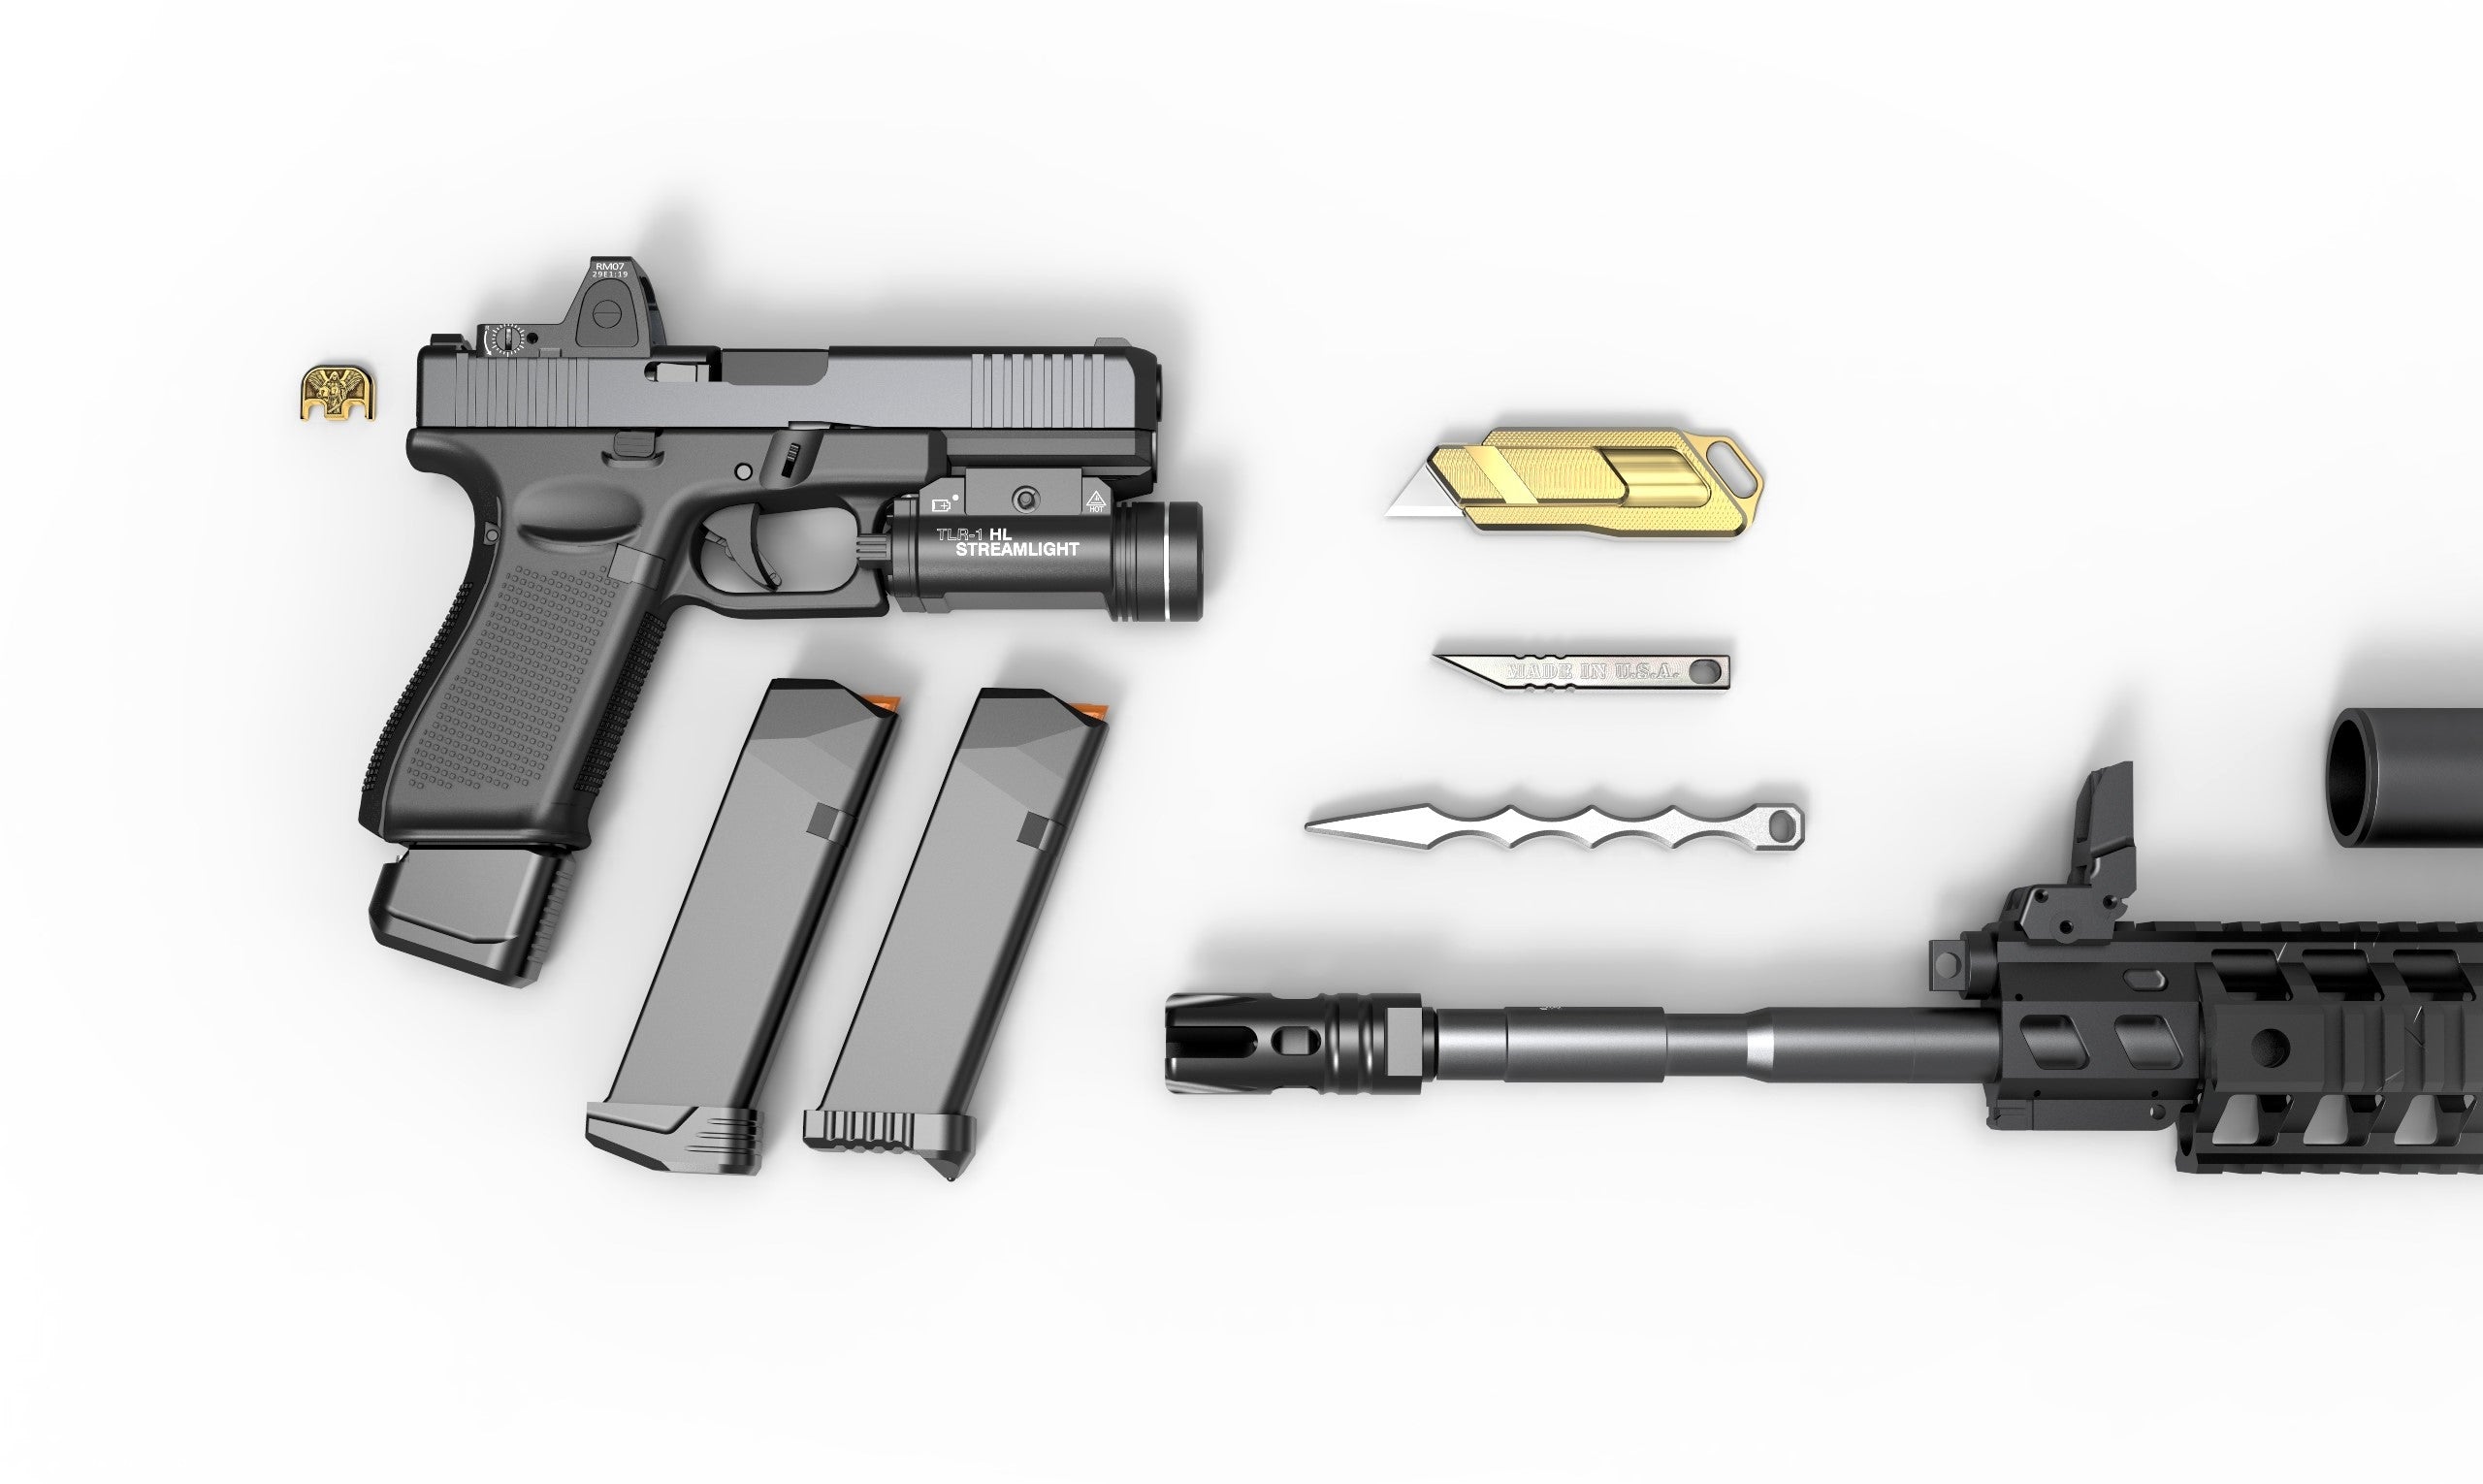 Milspin products glock magazine base plates and extension and tools and EDC products